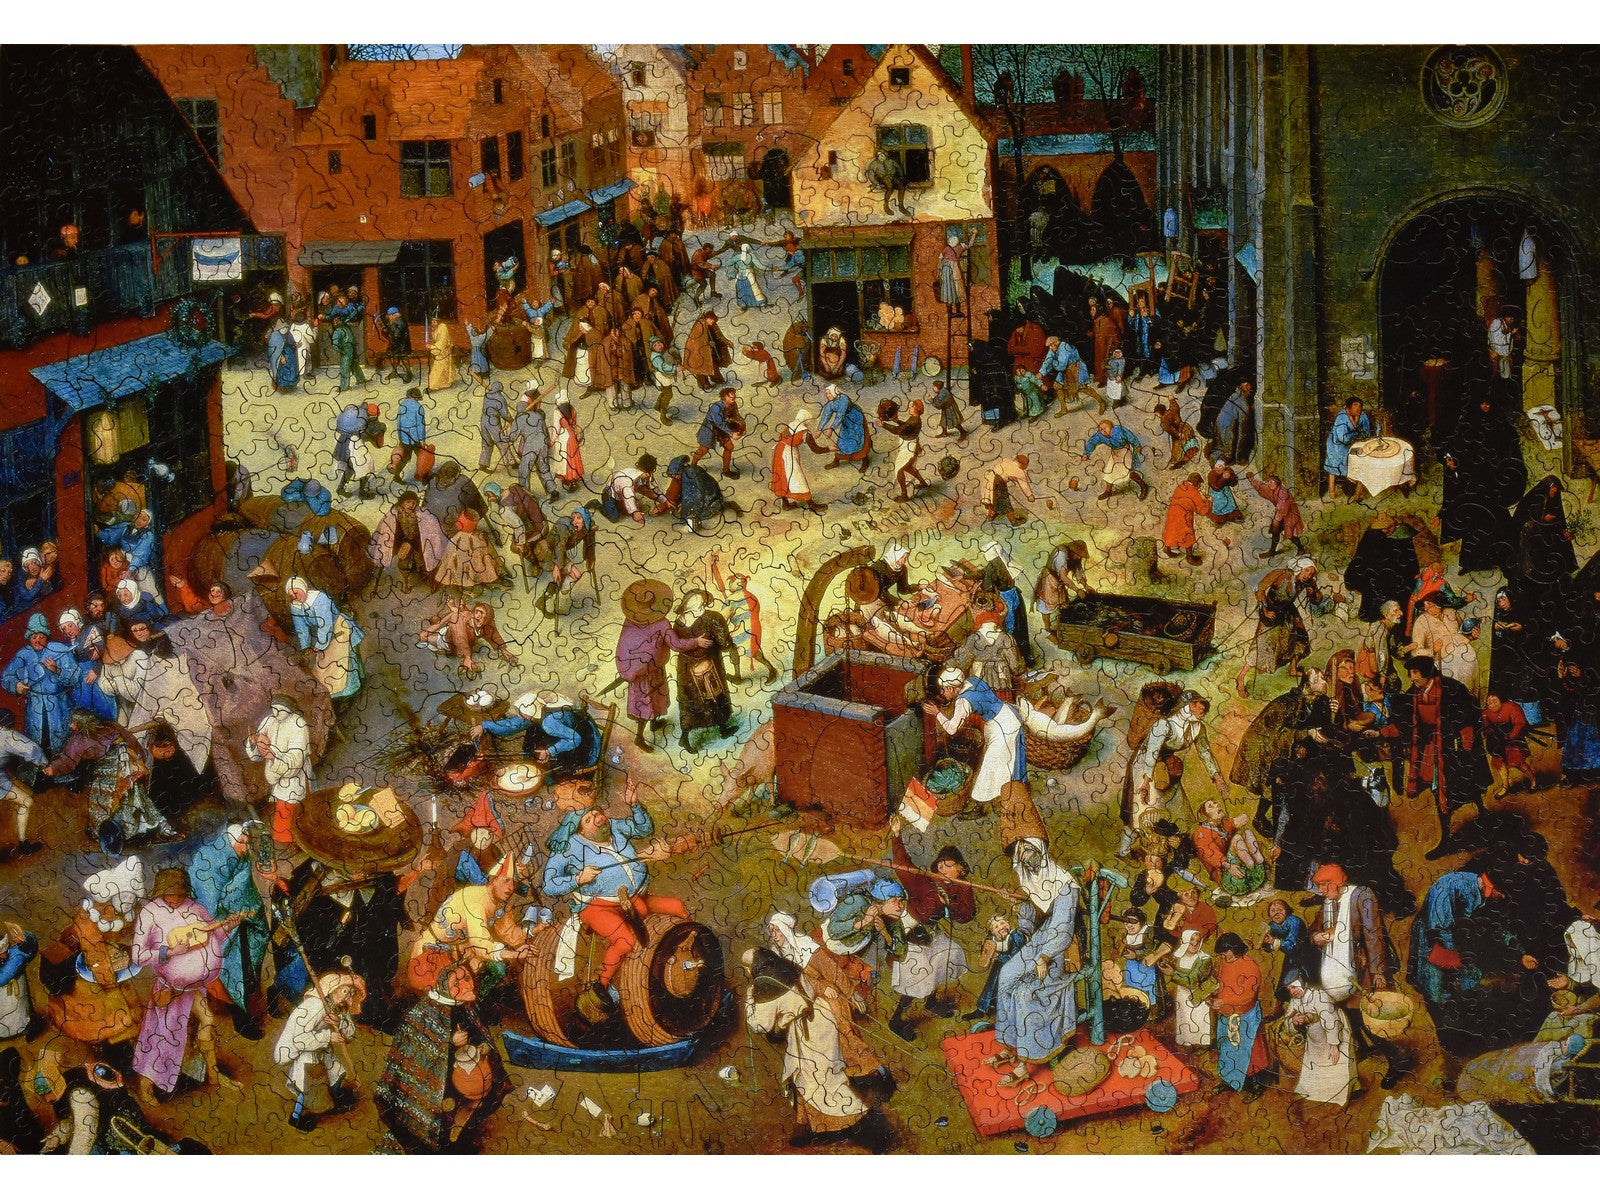 The front of the puzzle, The Battle of Carnival and Lent, which shows lots of people in a Medieval town square celebrating.